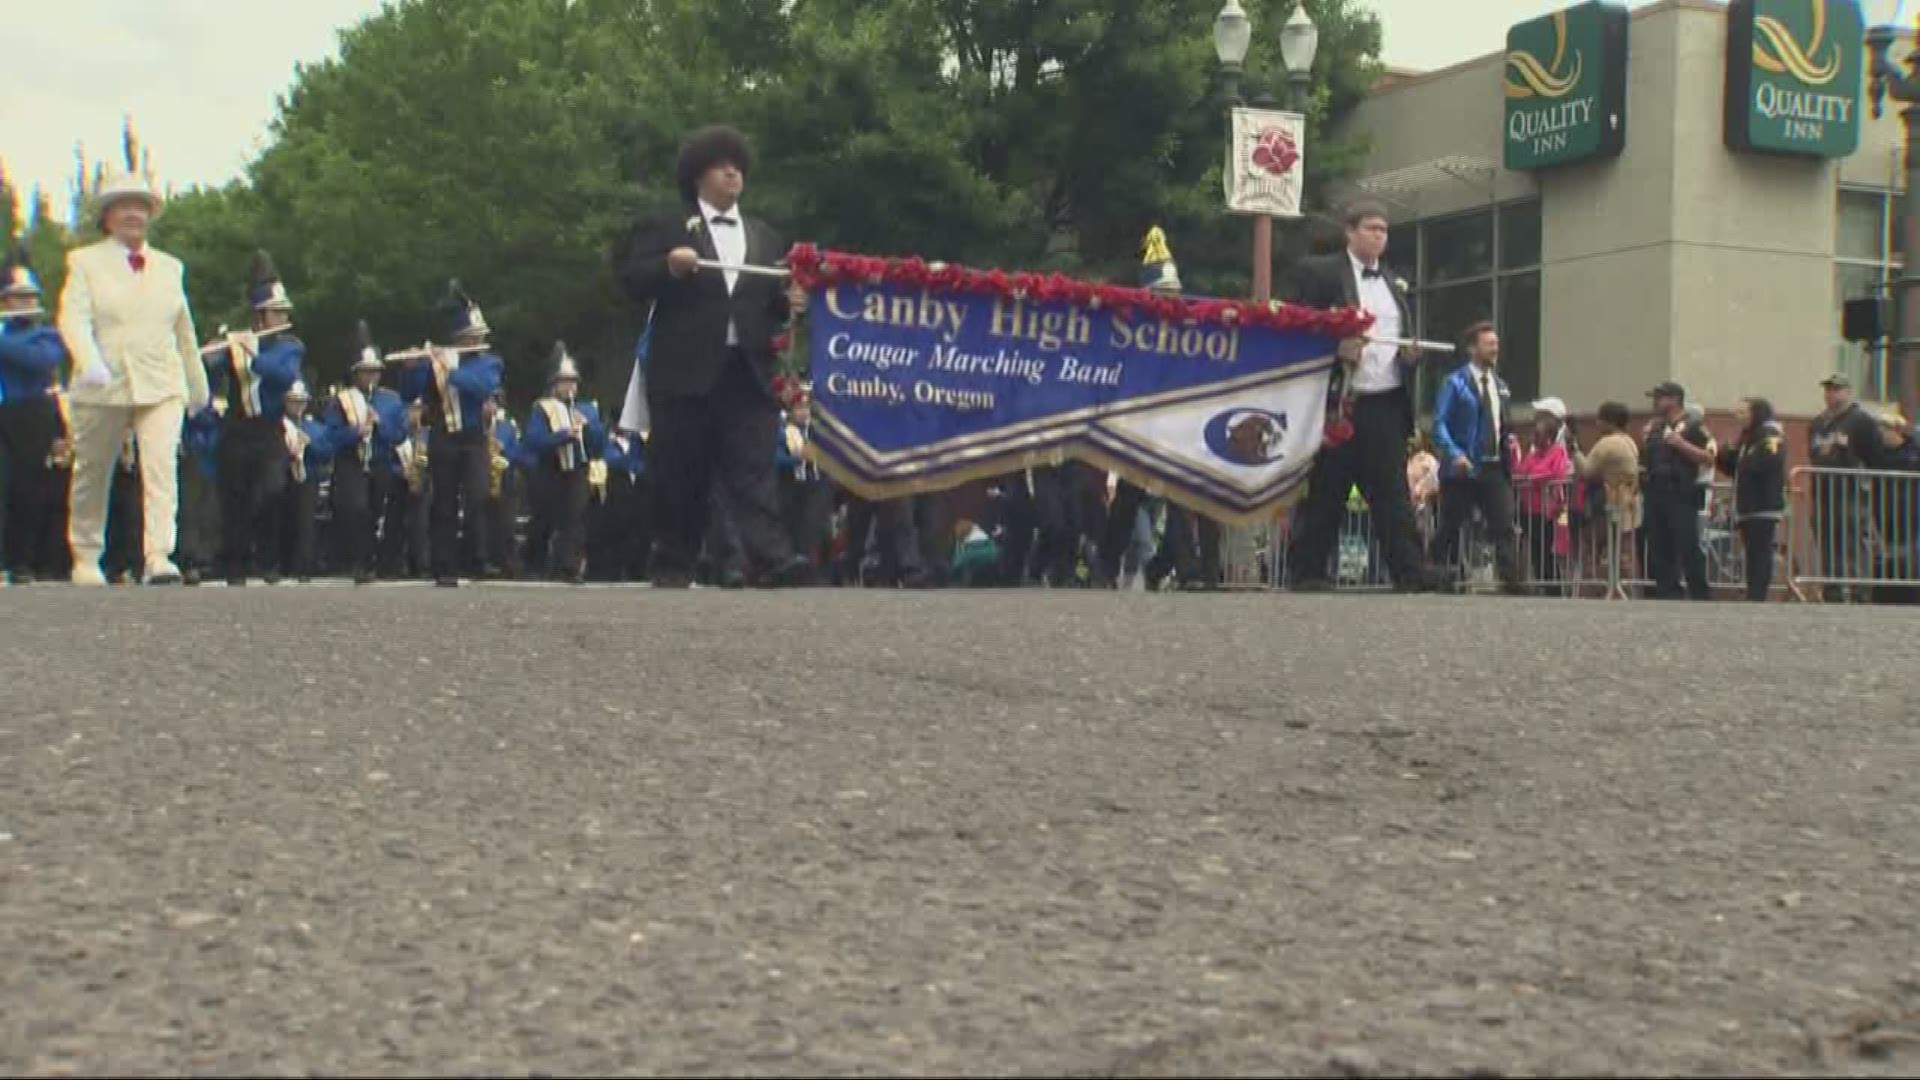 After not getting the opportunity to play at the Starlight Parade, the Canby High School marching band performed at the Grand Floral Parade